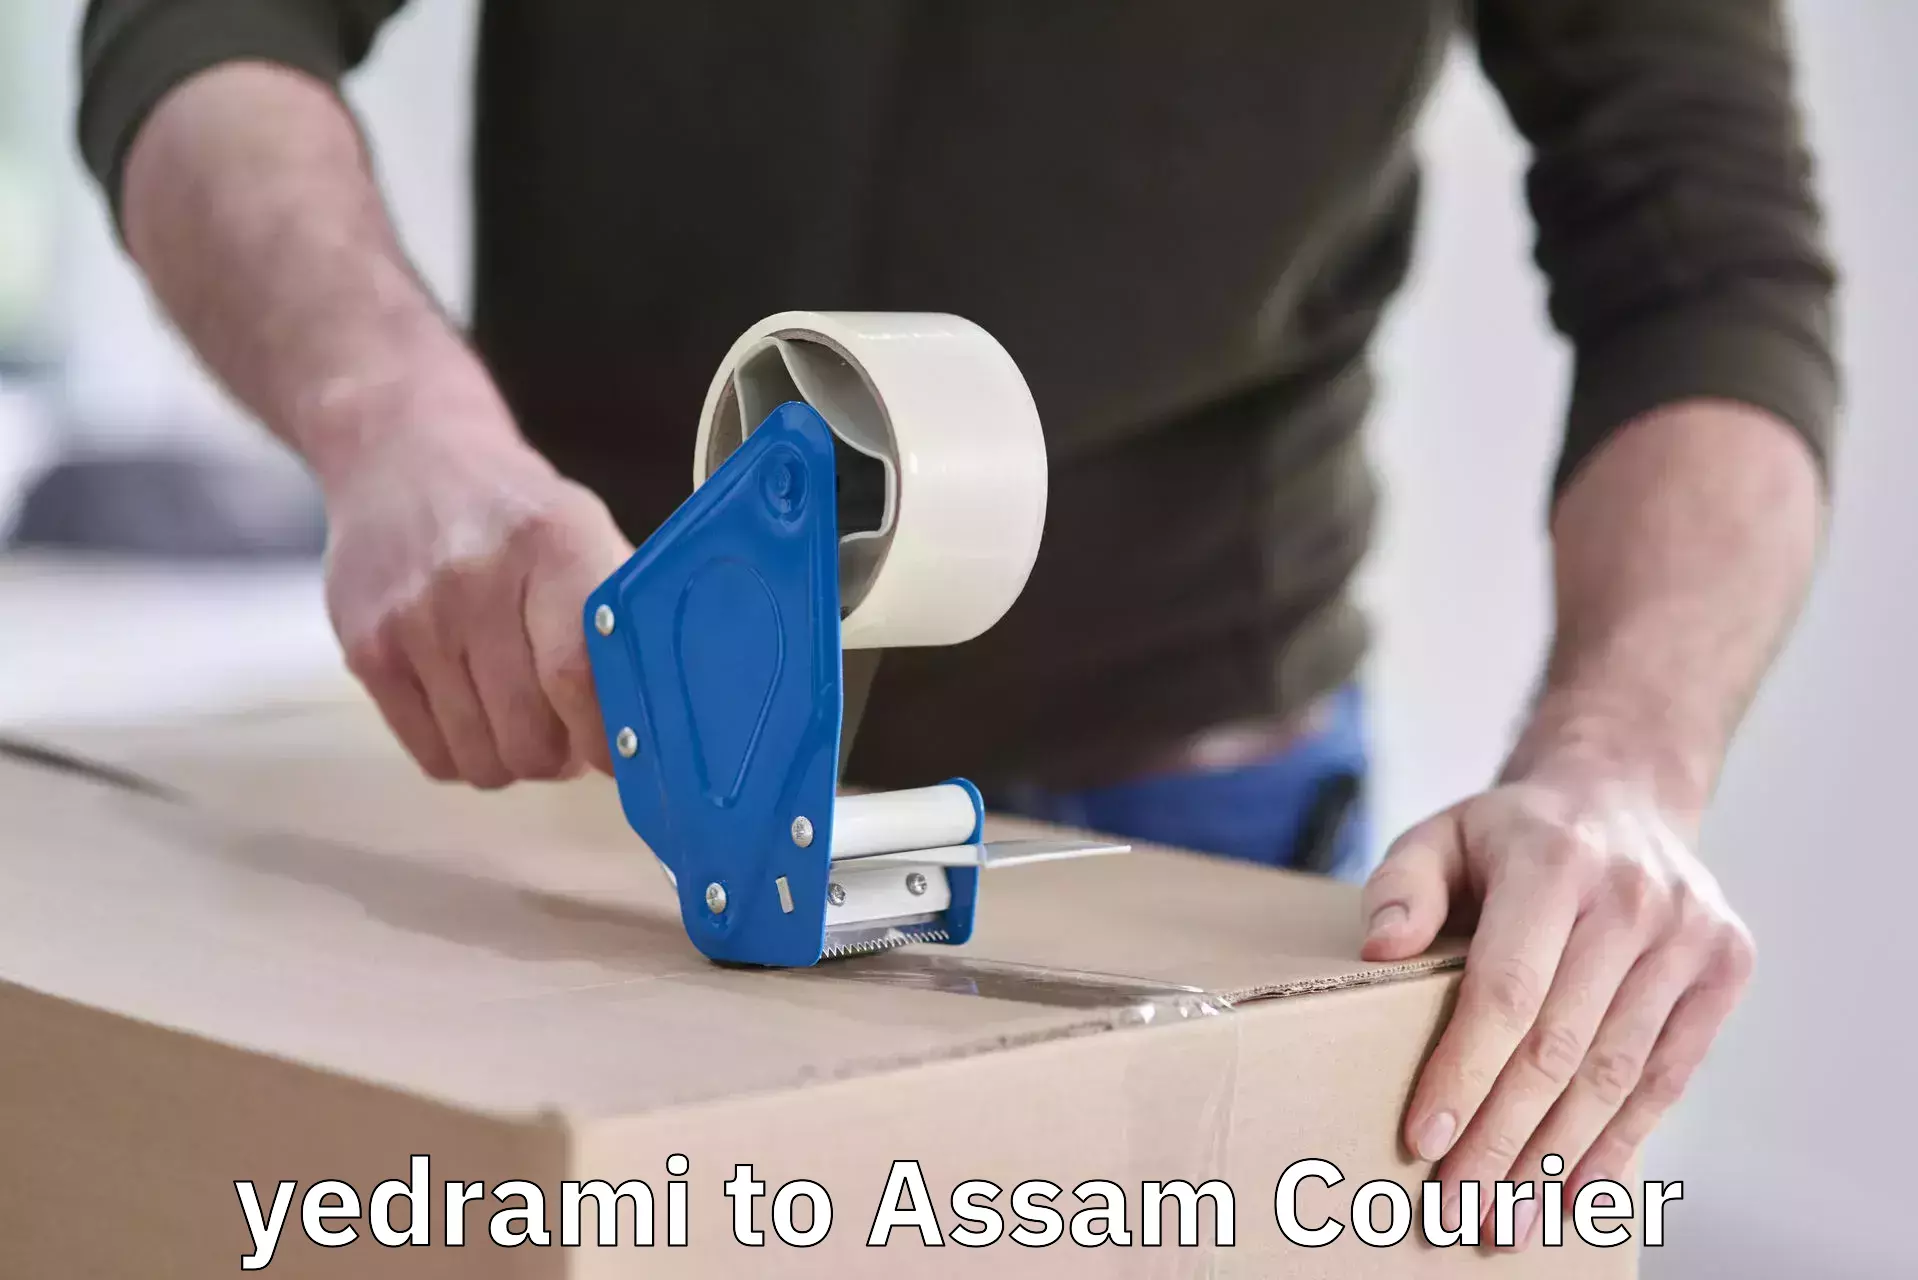 Luggage delivery network yedrami to Assam